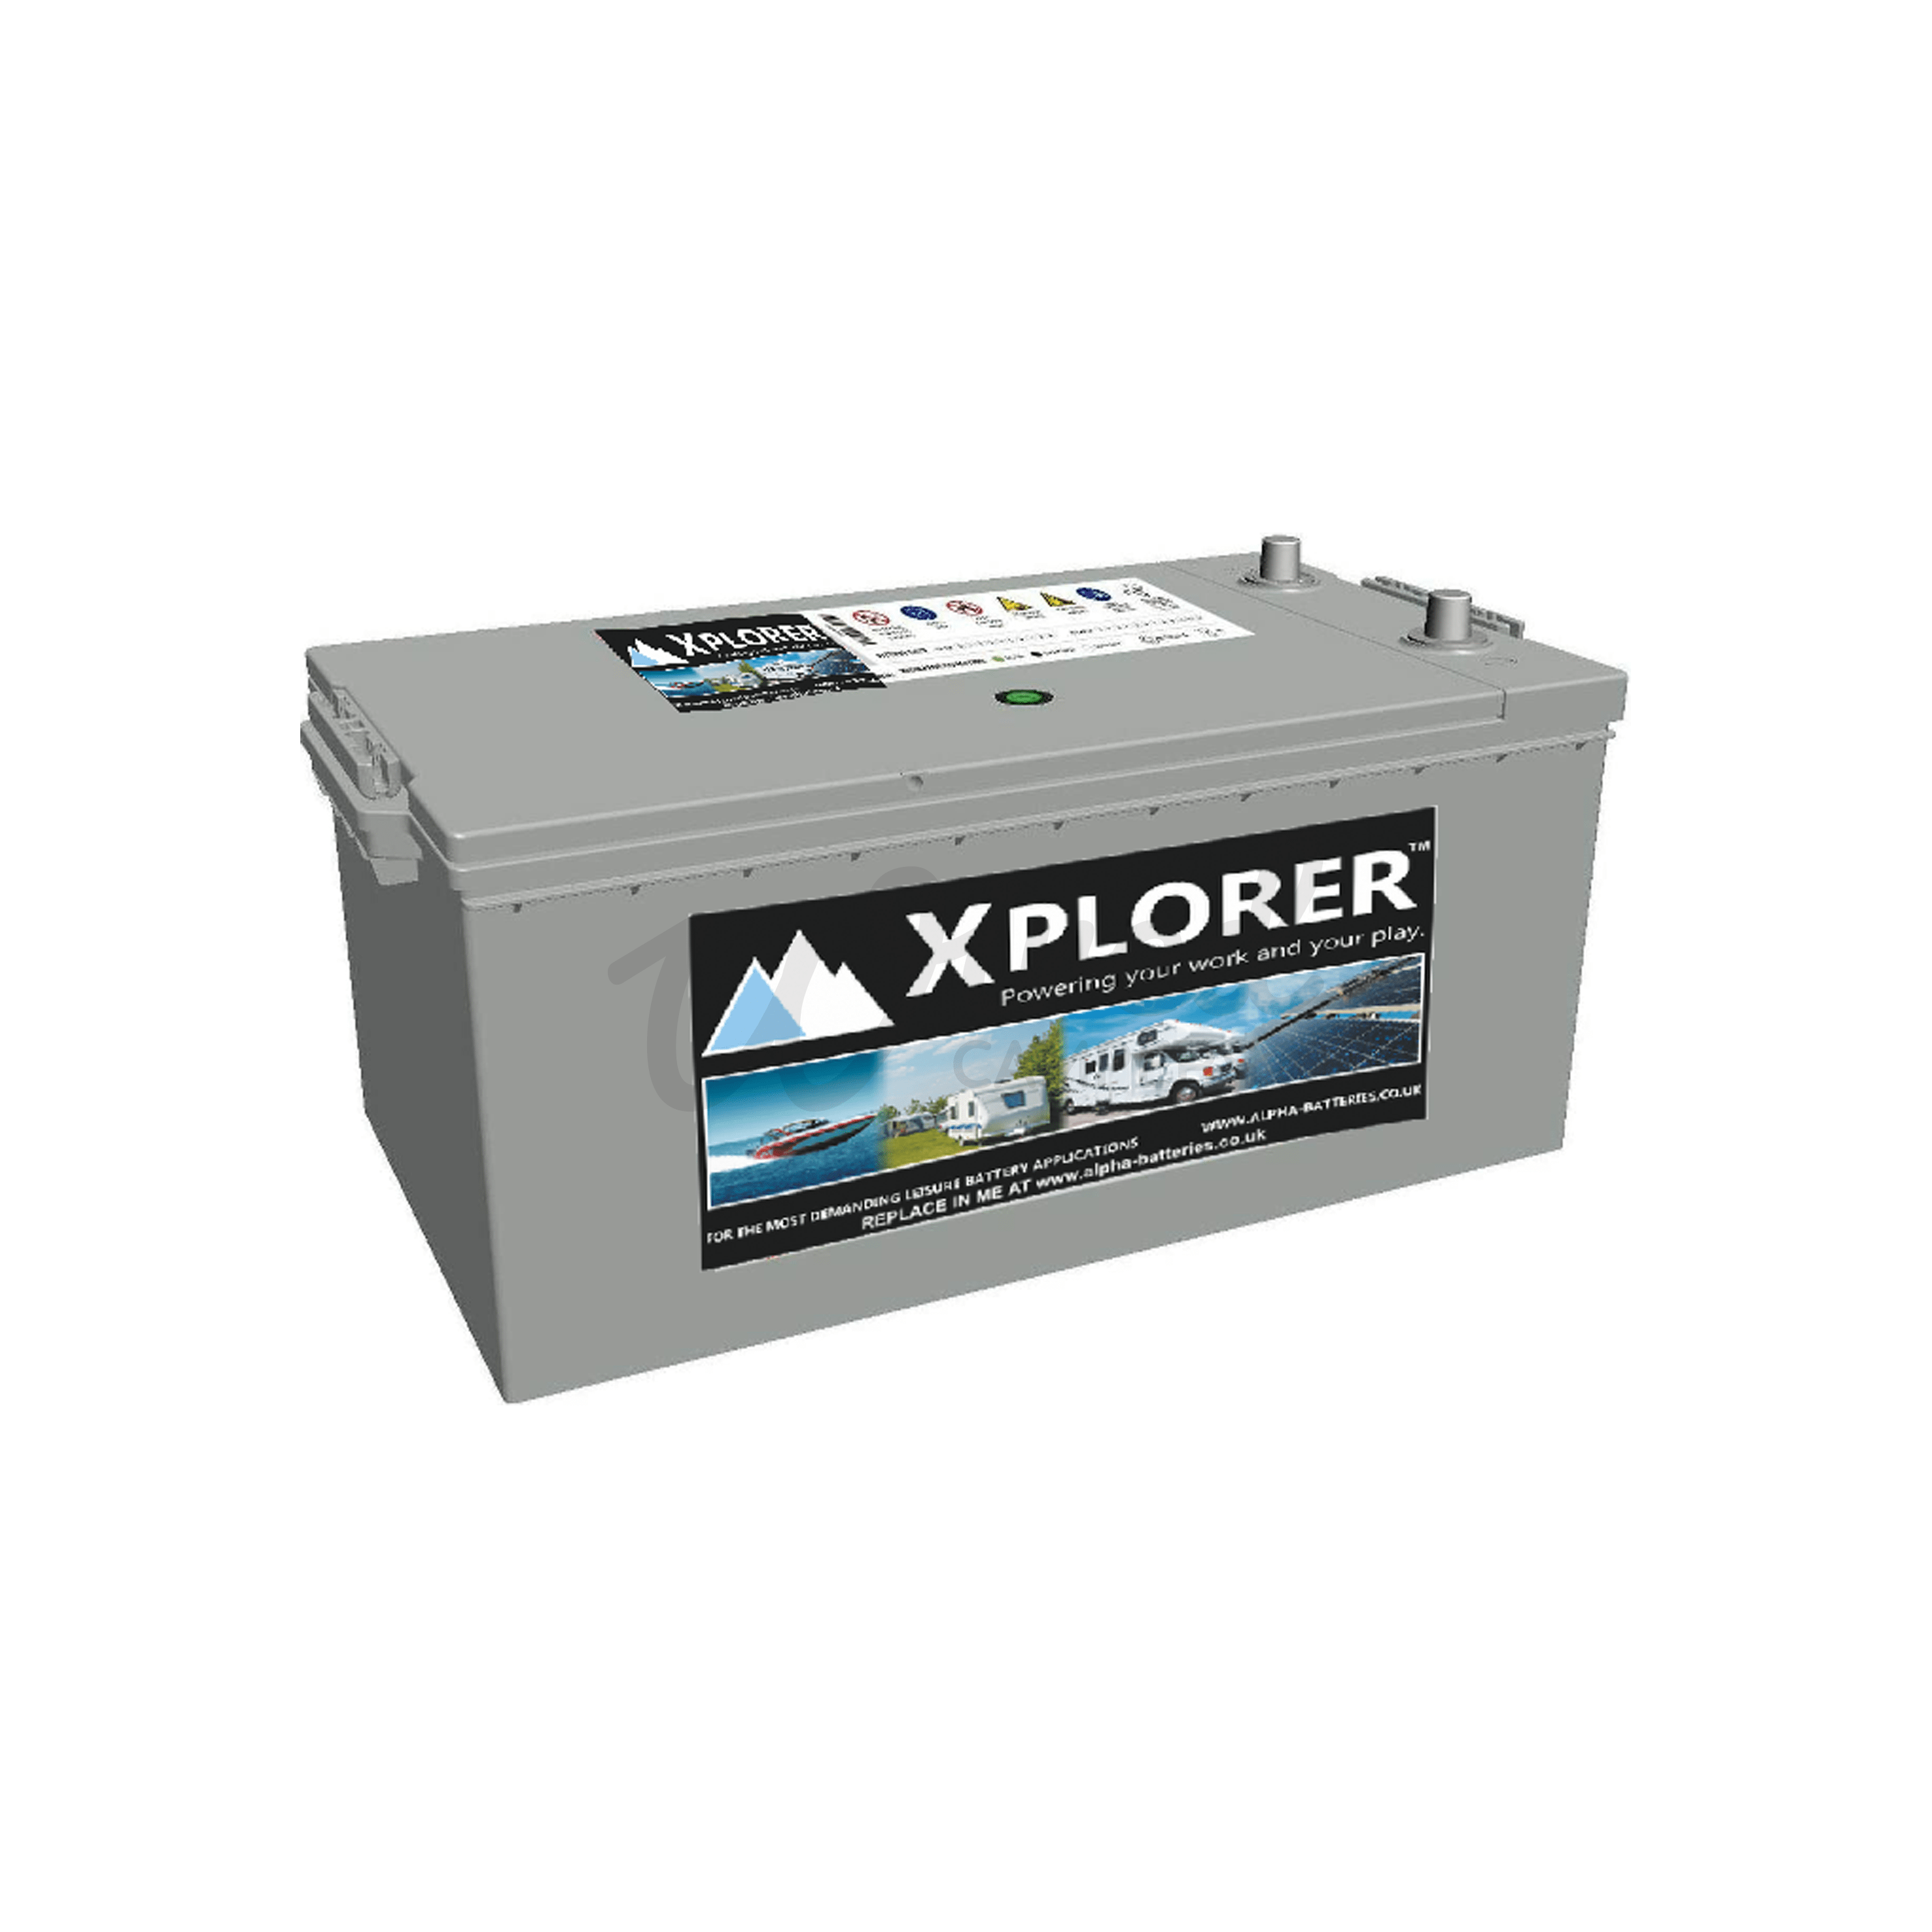 Wired Campers Limited 12V 190AH Xplorer Dual Purpose Lead Acid Leisure Battery